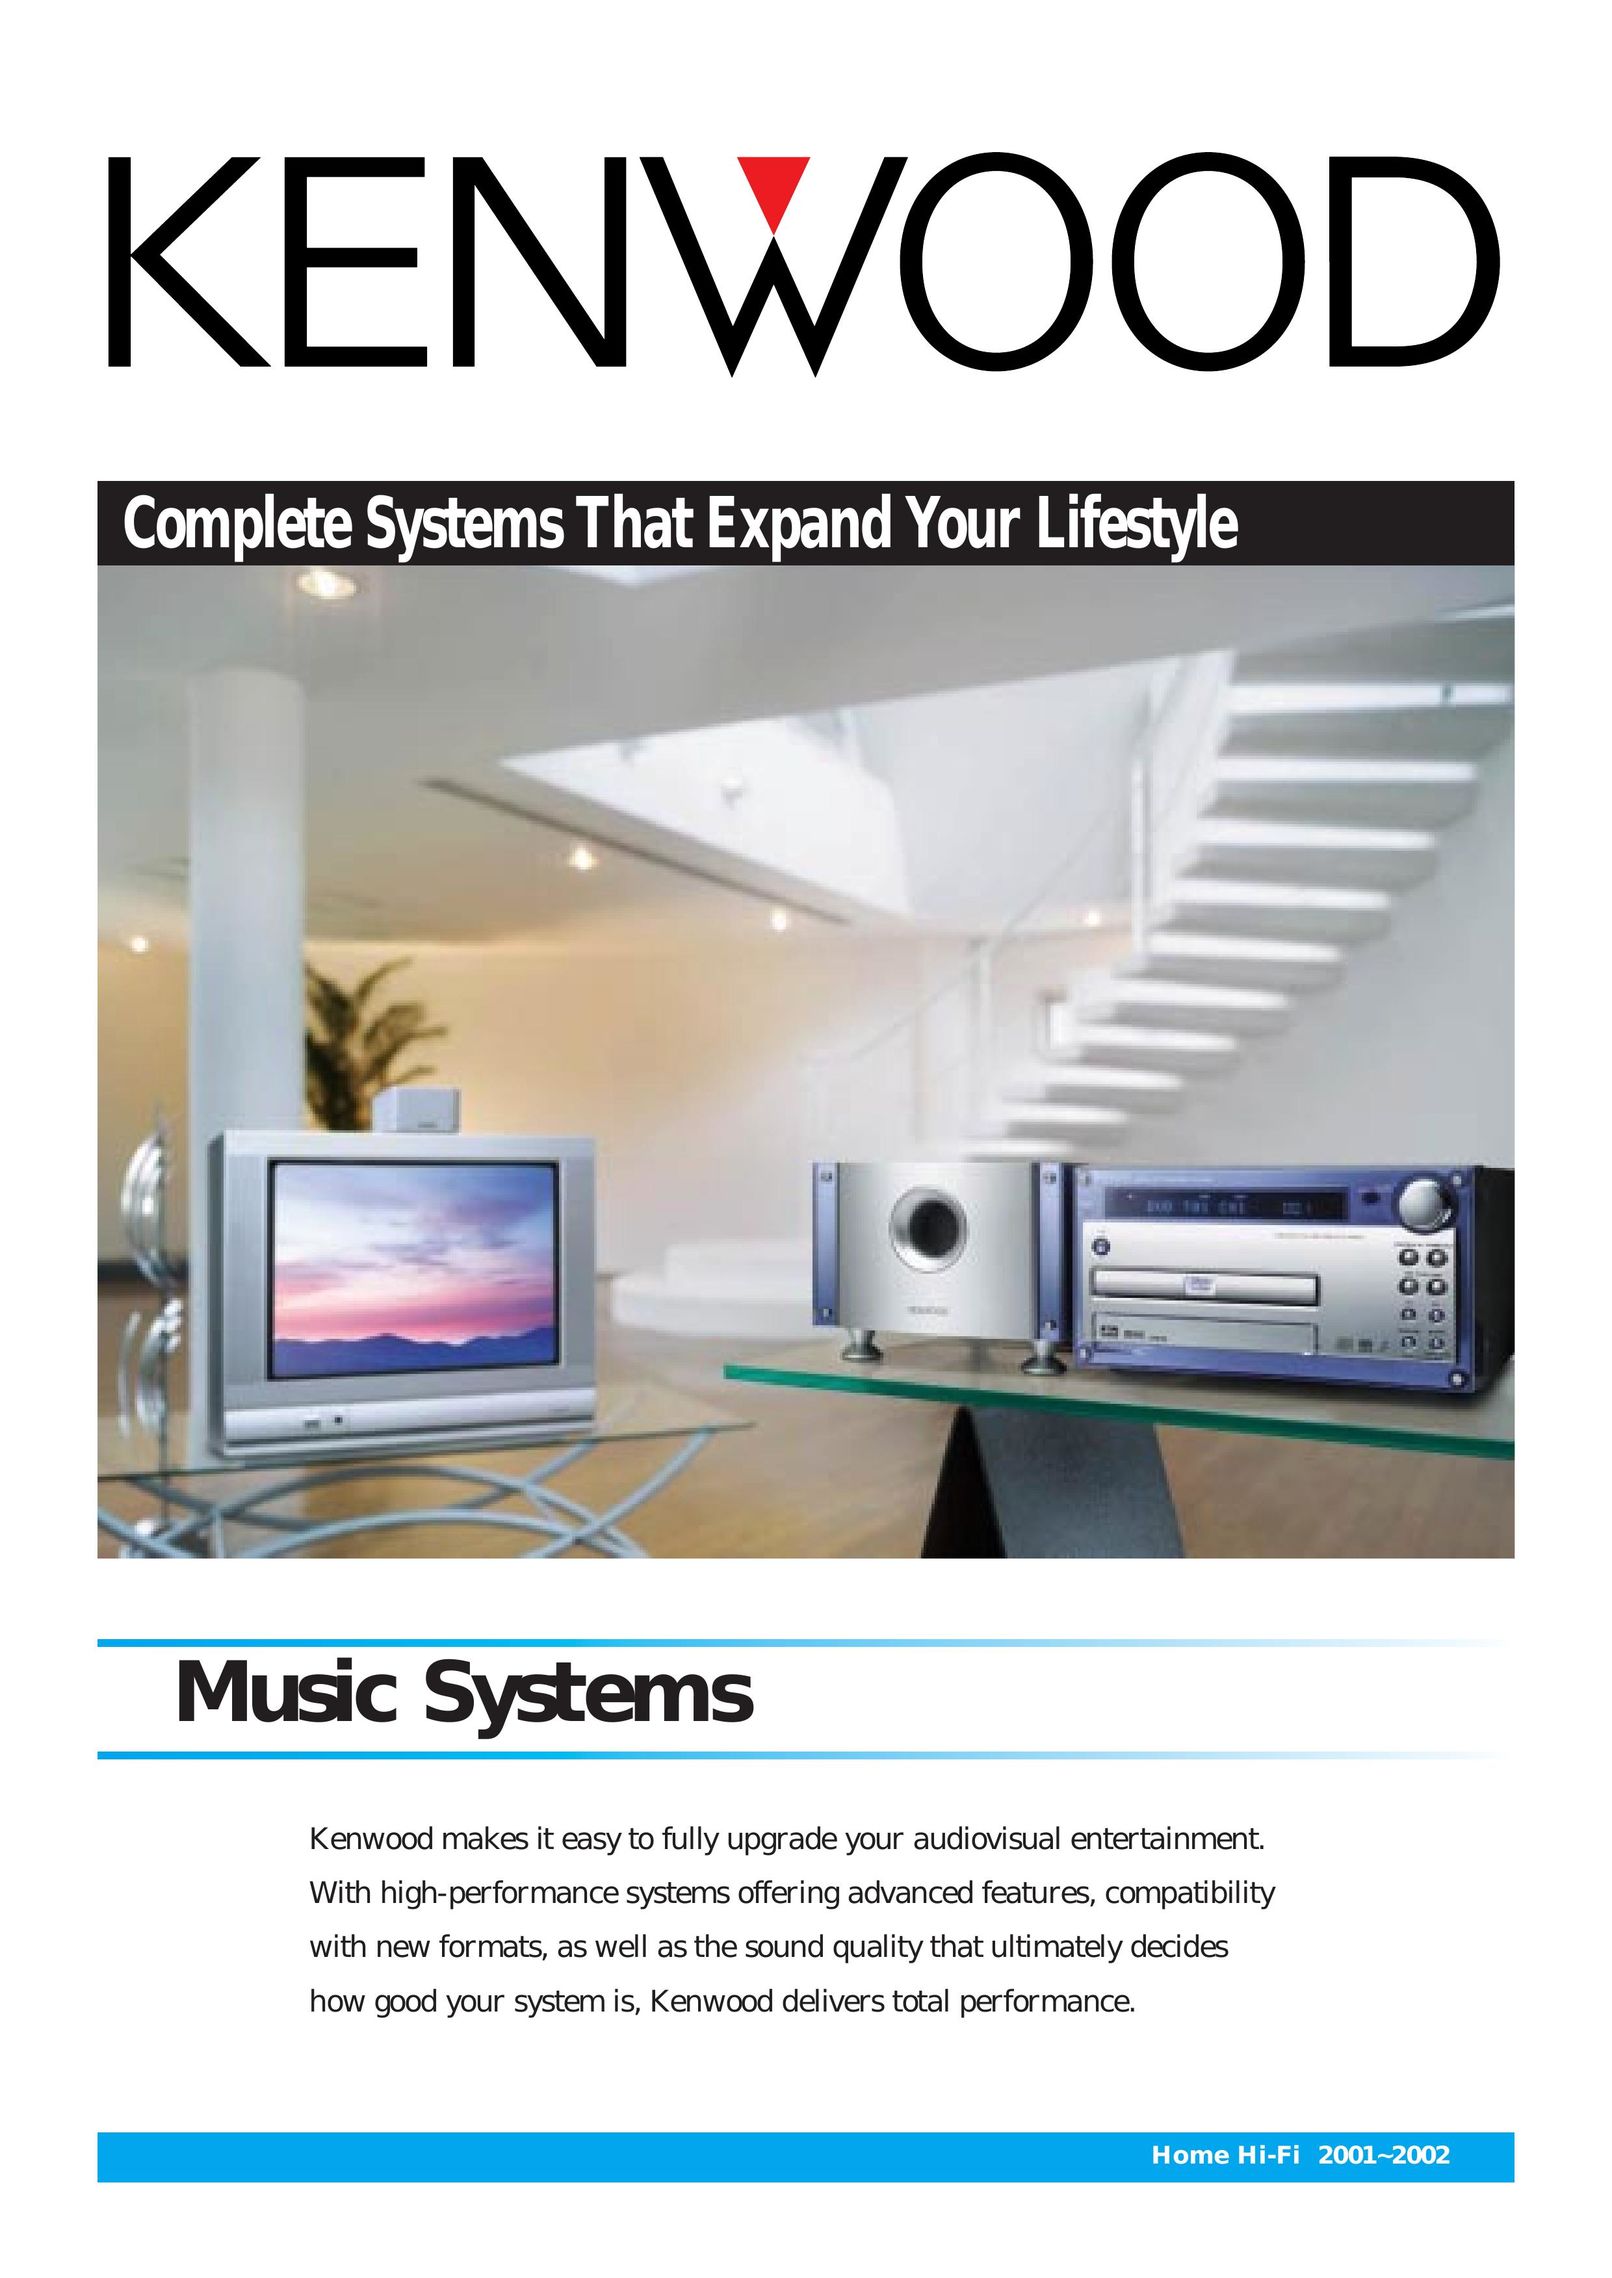 Kenwood HM-982RW Stereo System User Manual